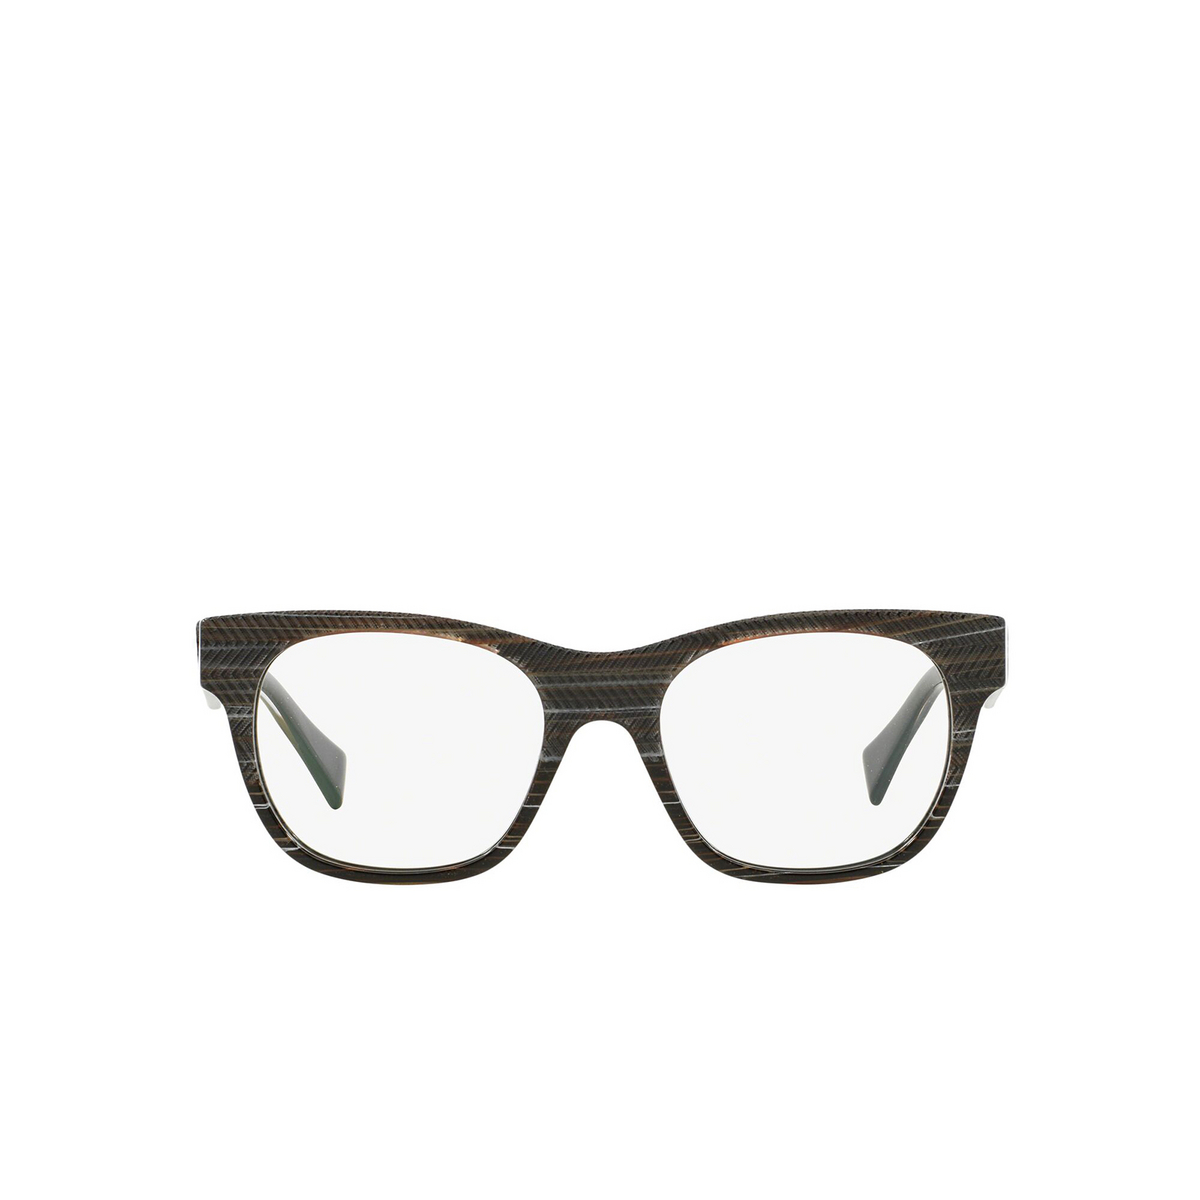 Alain Mikli® Square Eyeglasses: A03025 color Wires Brown B0D9 - front view.